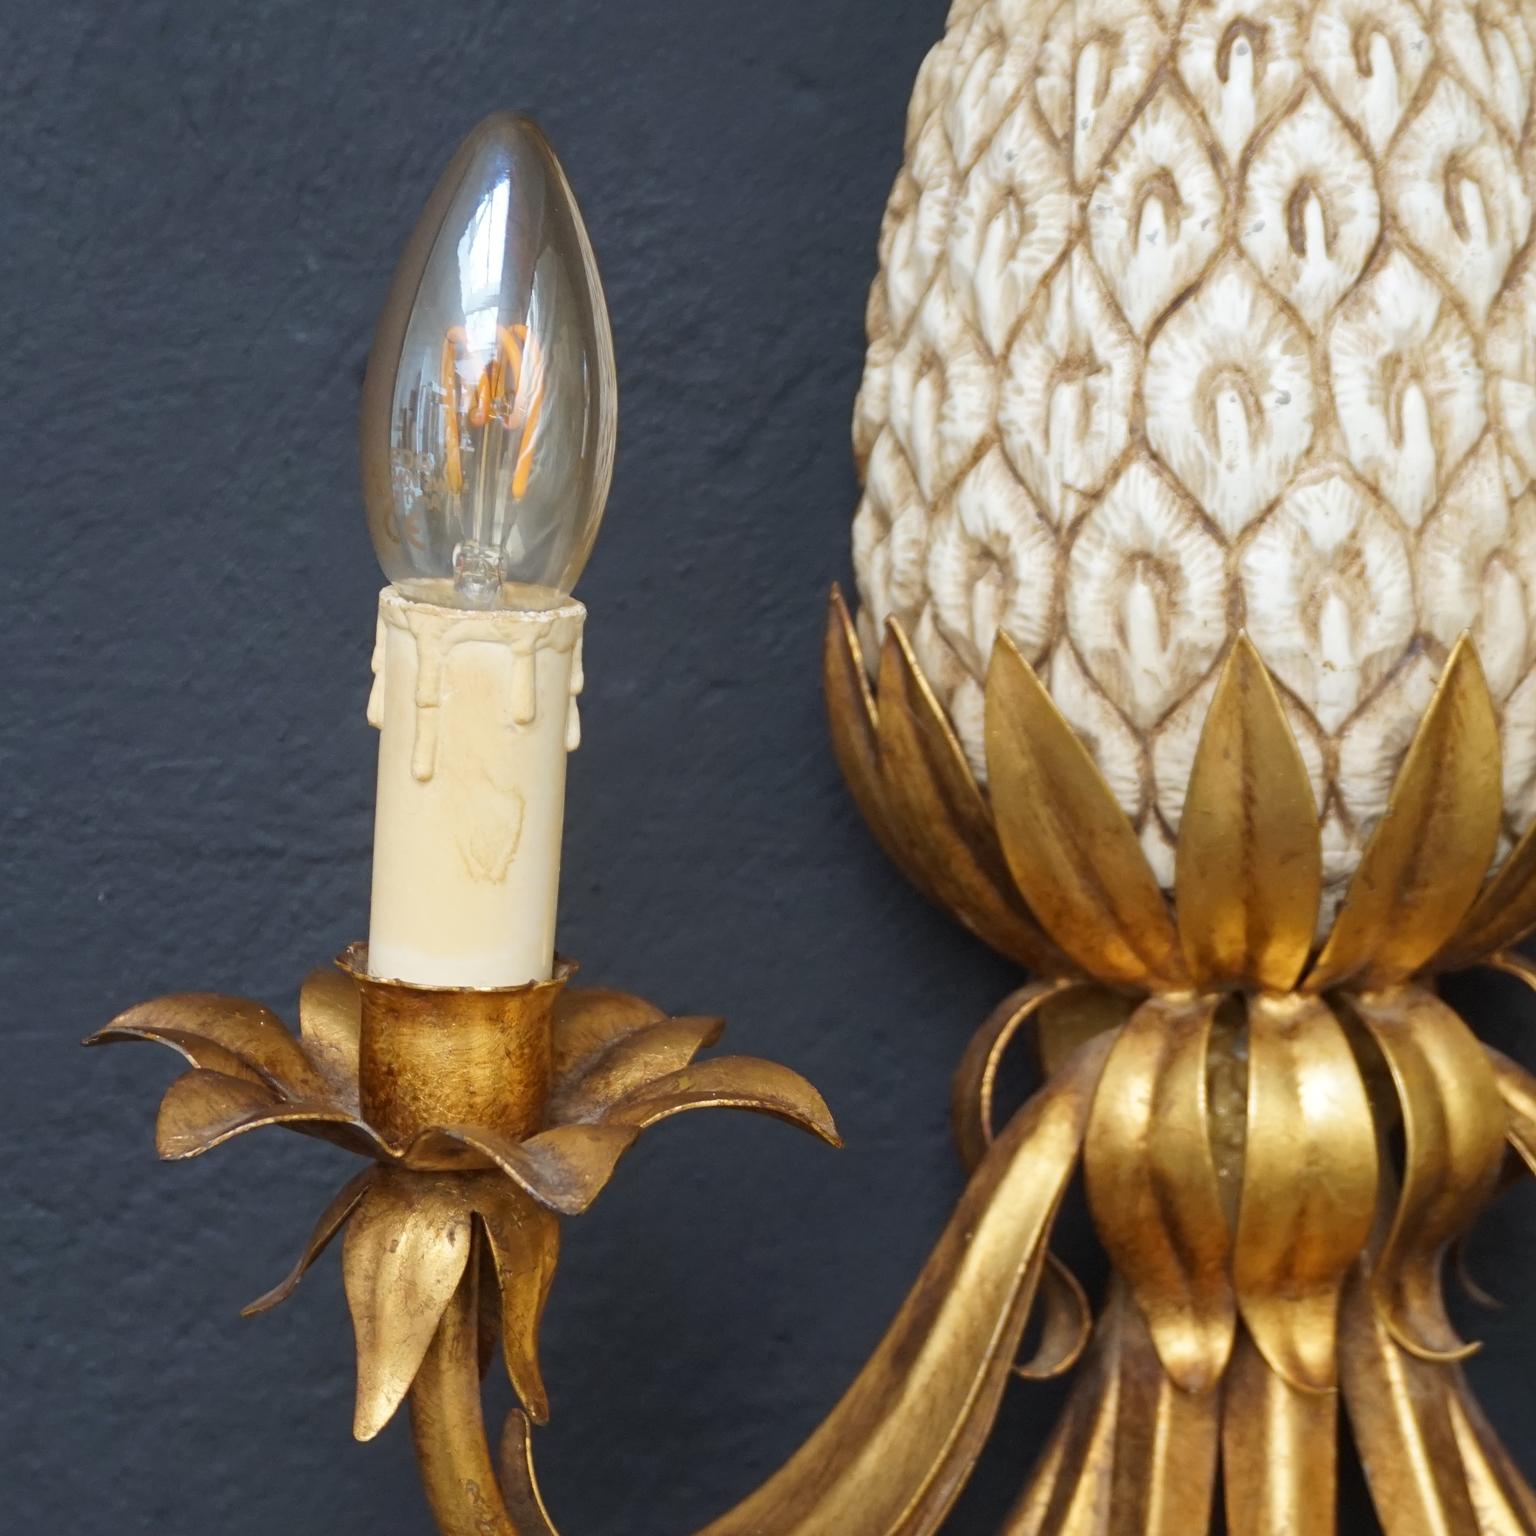 Painted Midcentury French Hollywood Regency Pineapple Maison Charles Style Wall Sconce